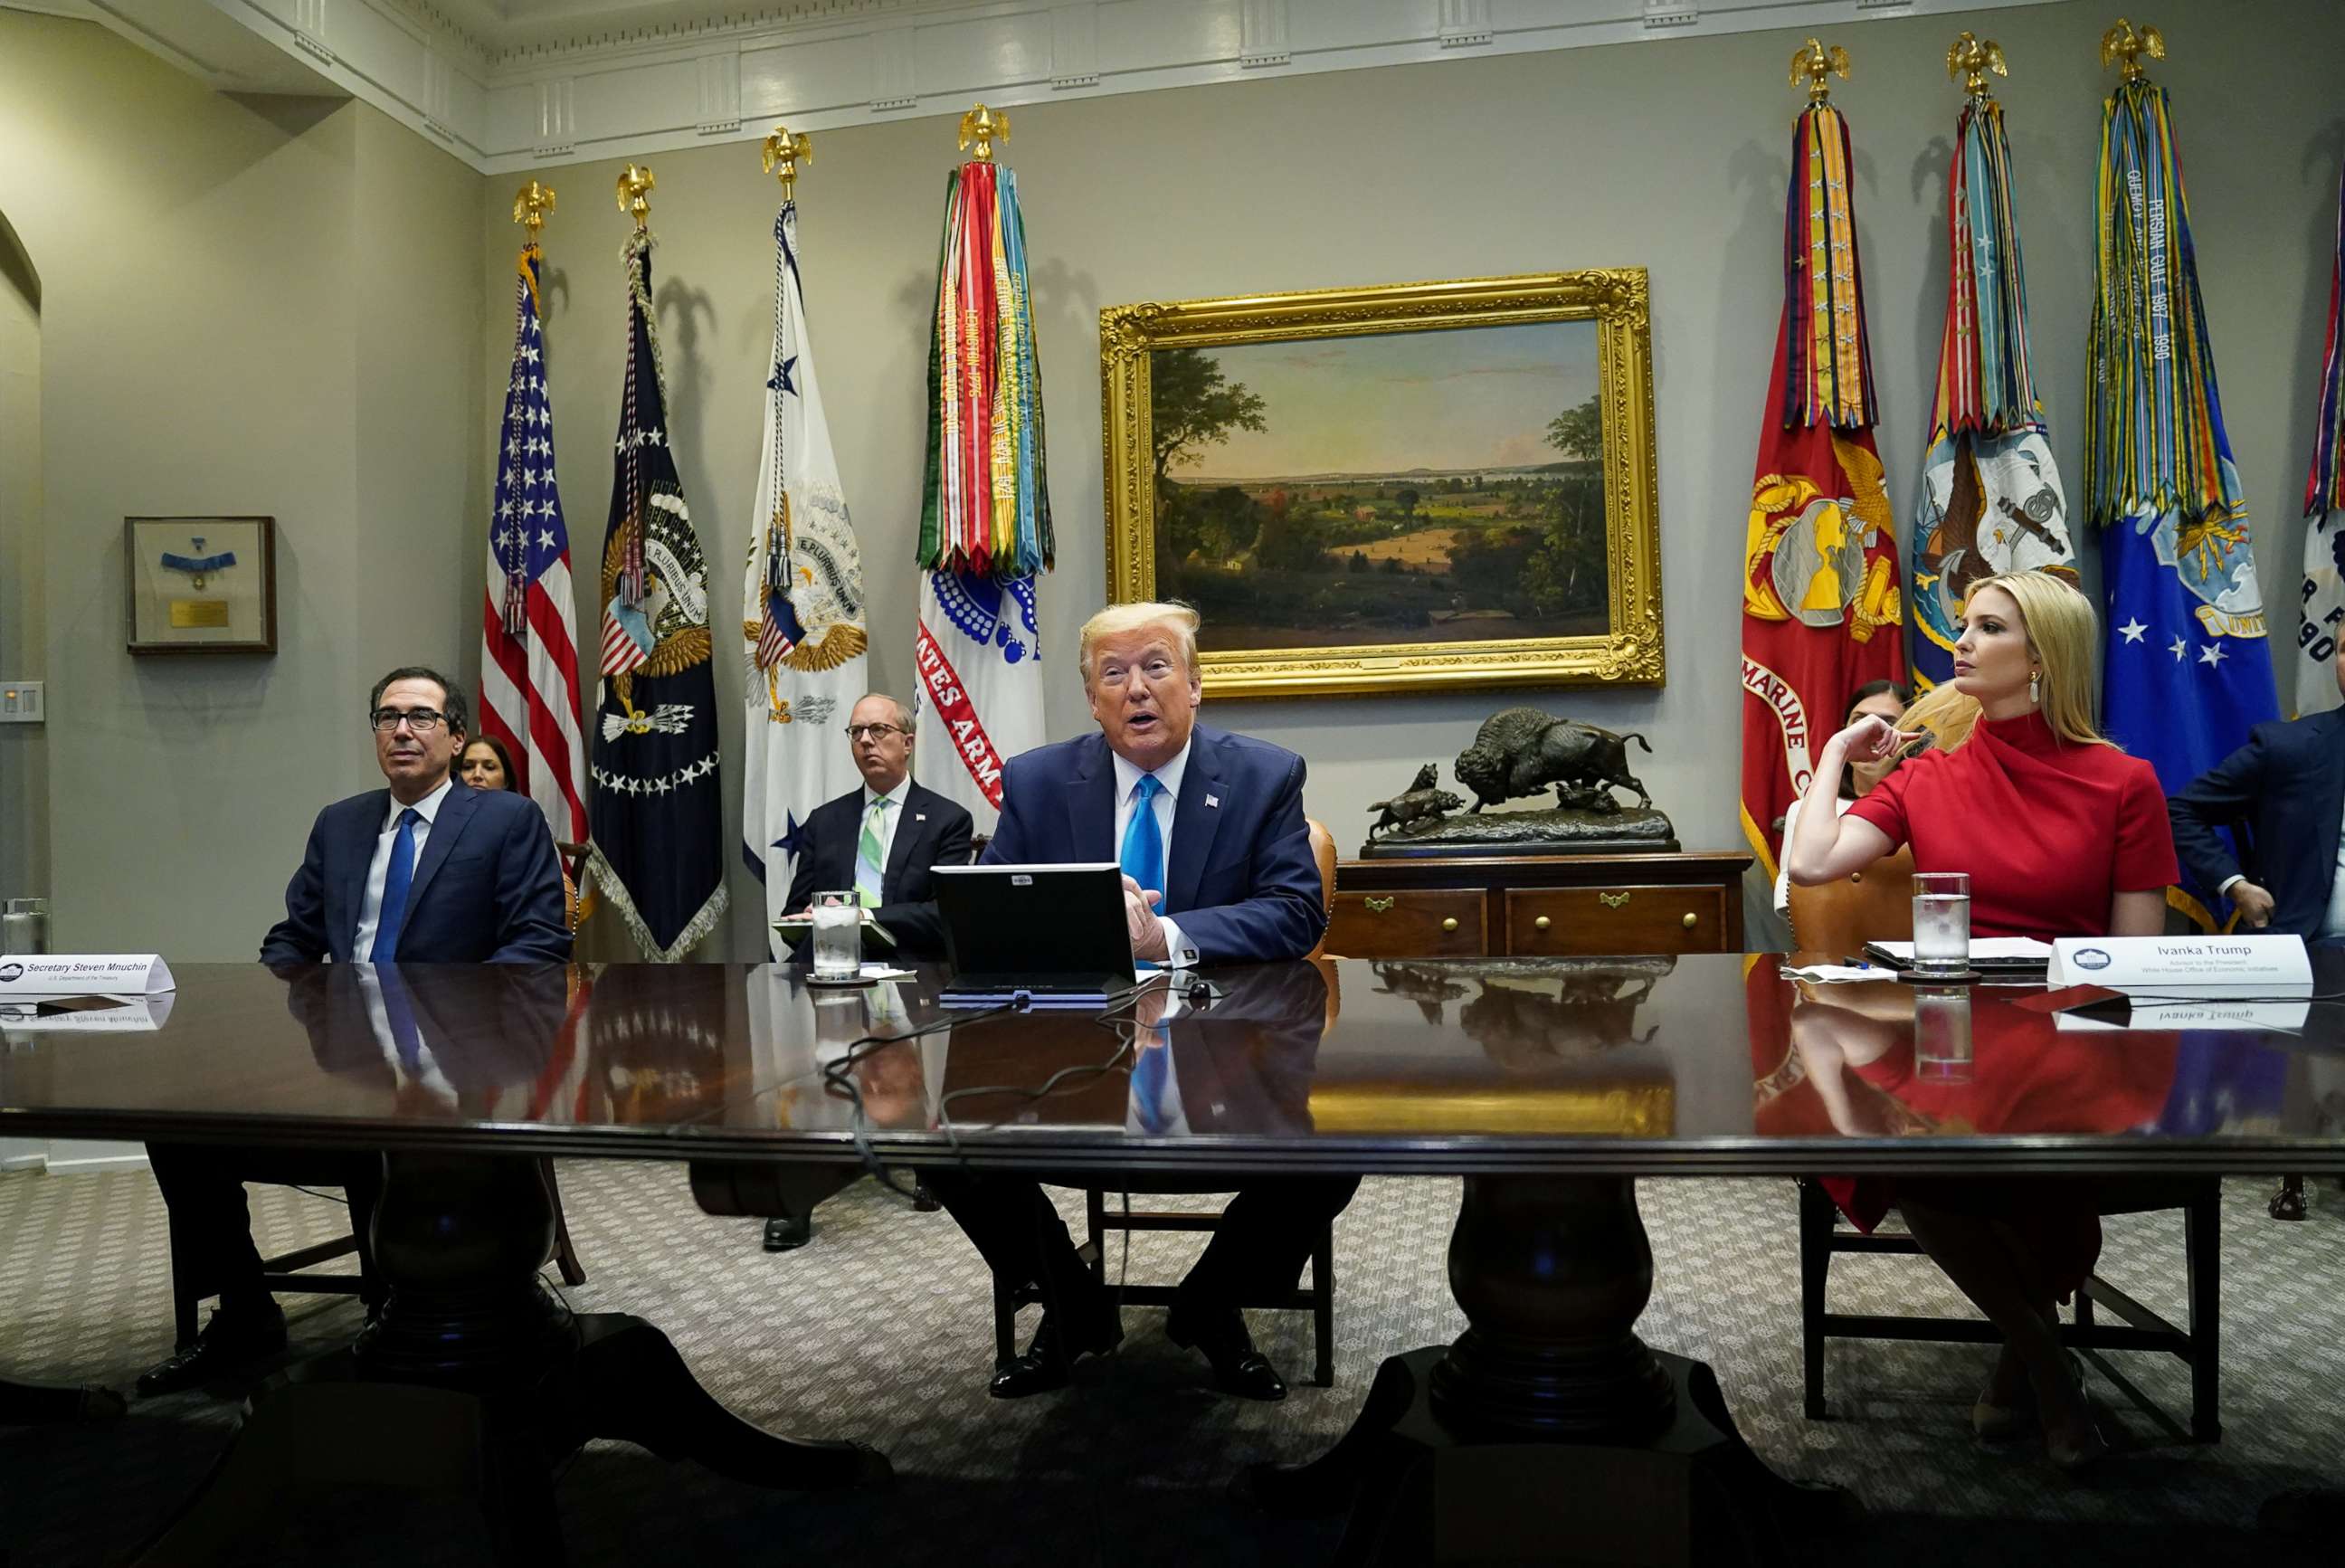 PHOTO: President Donald Trump, flanked by Treasury Secretary Steven Mnuchin and his daughter and senior advisor Ivanka Trump, participates in a "small business relief update" conference in the Roosevelt Room at the White House, April 7, 2020.